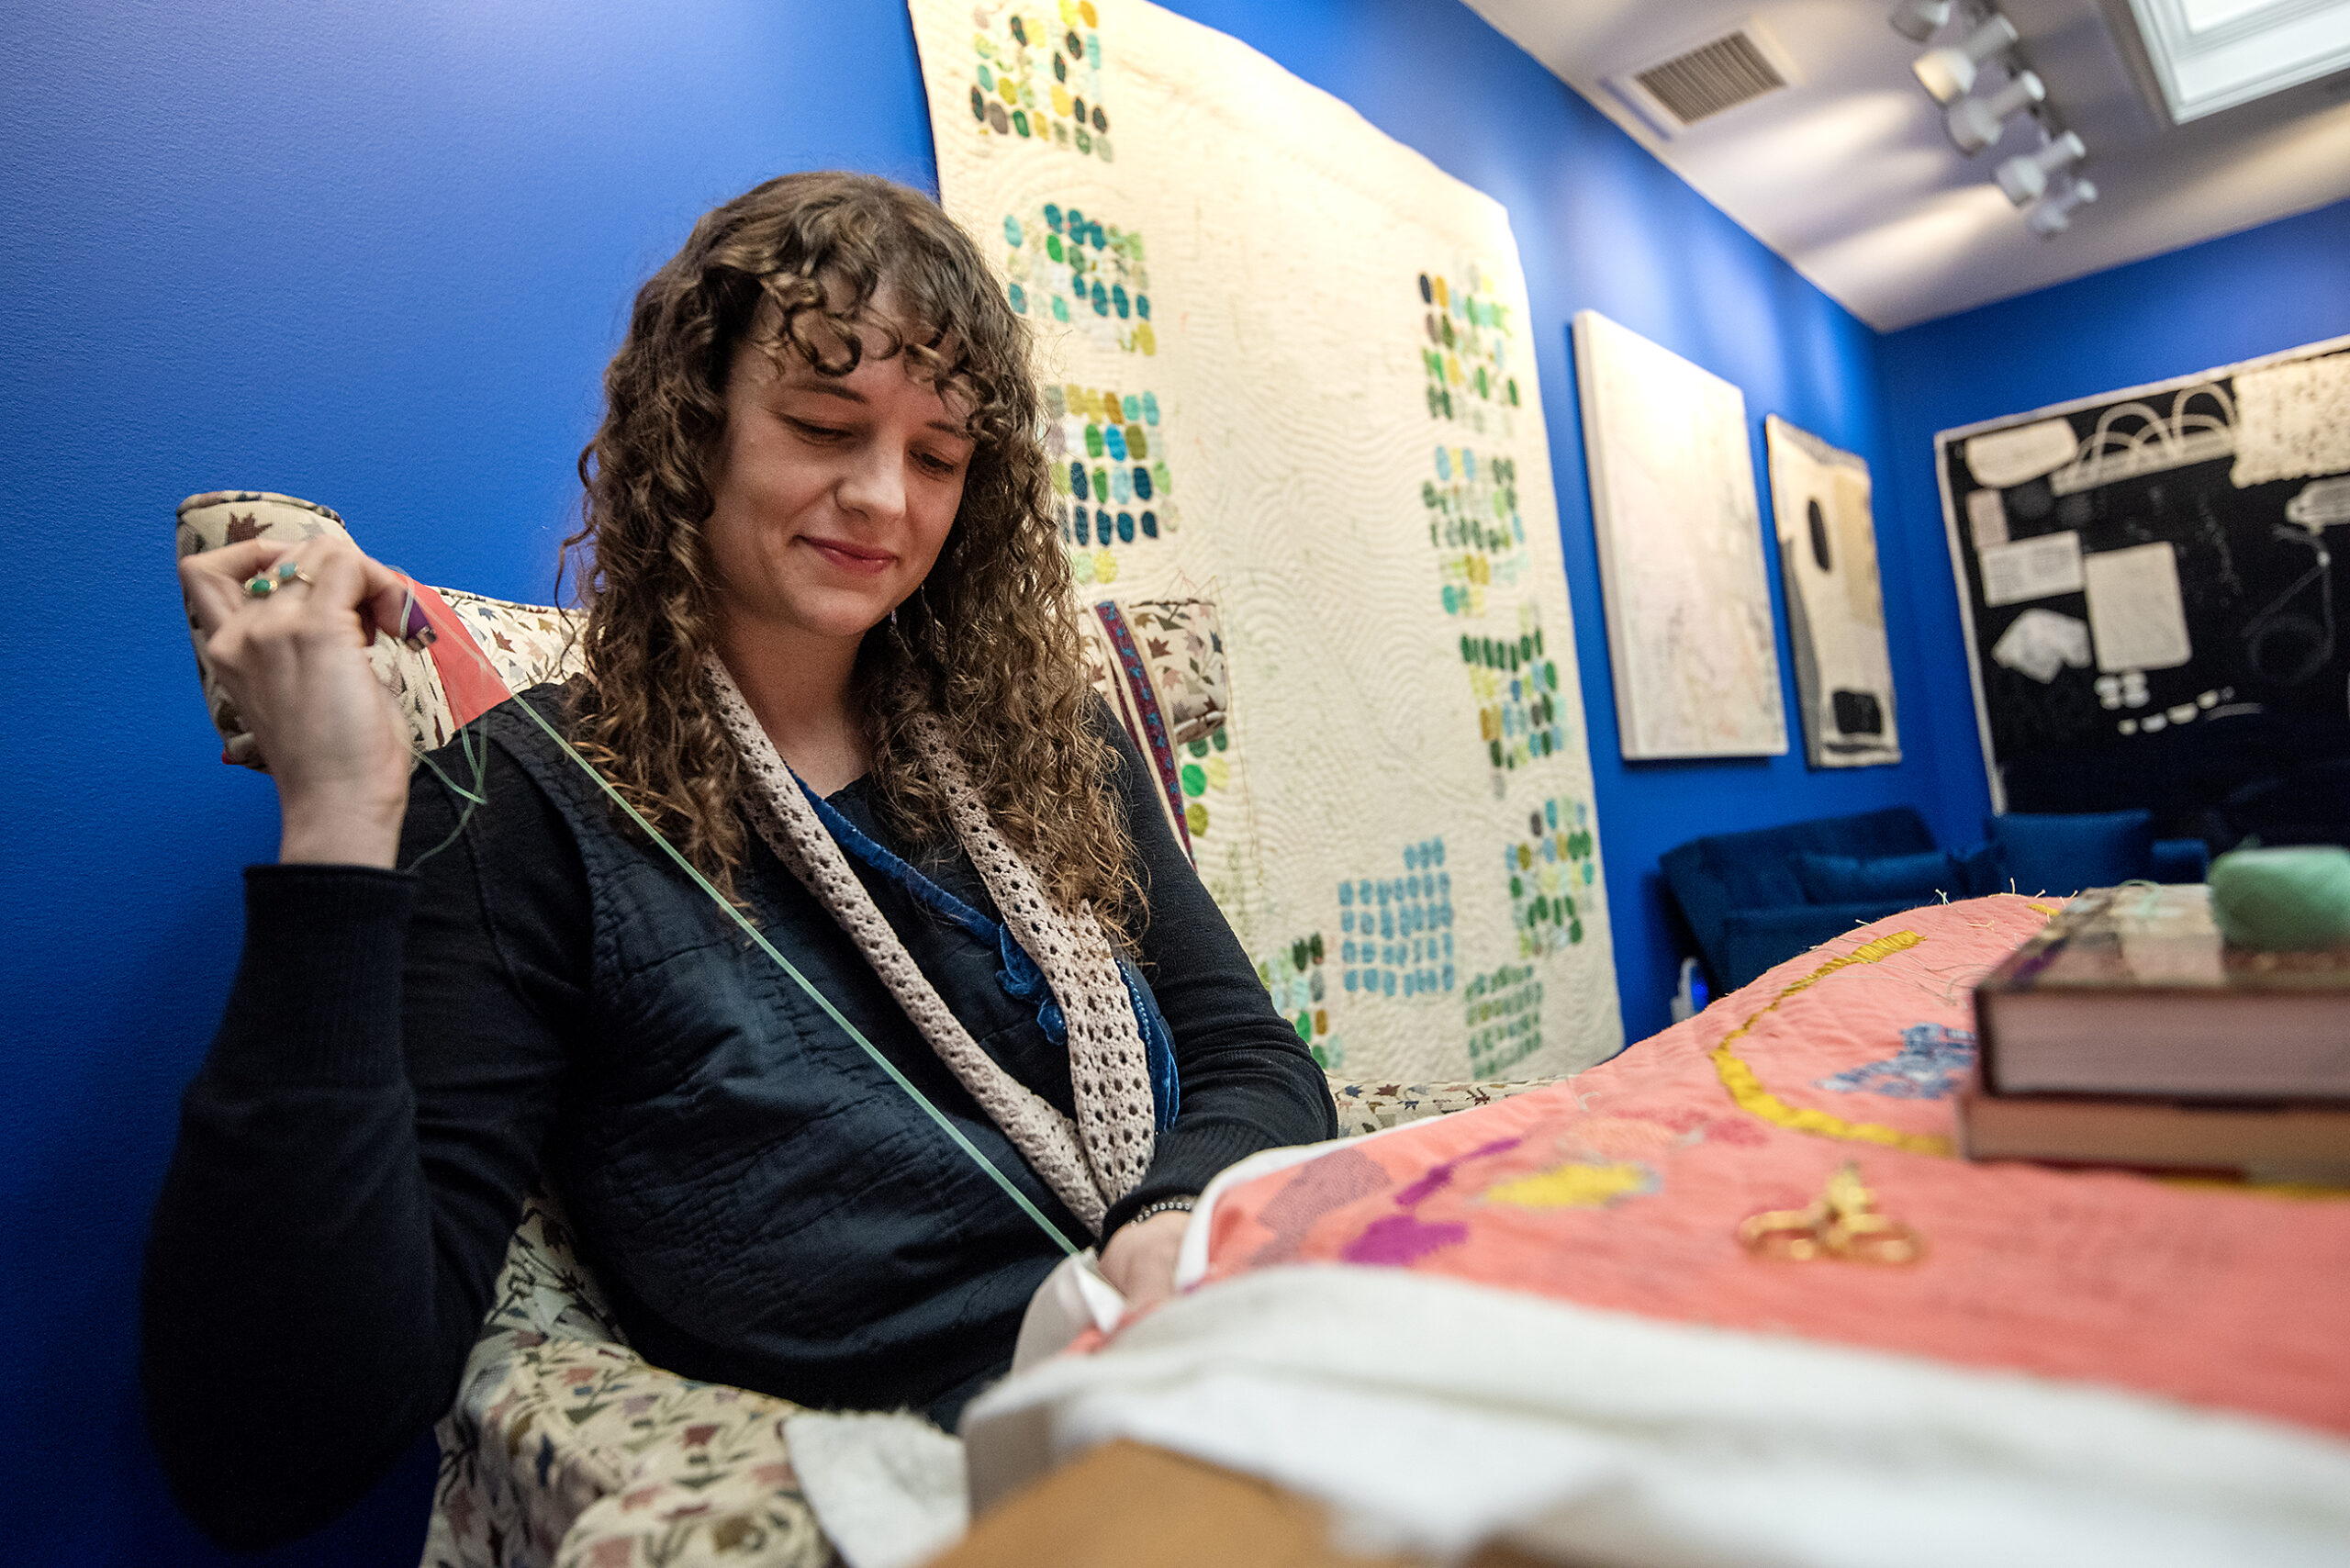 Telling stories and casting spells: Pfister Hotel’s Artist in Residence Heidi Parkes on her diary quilts